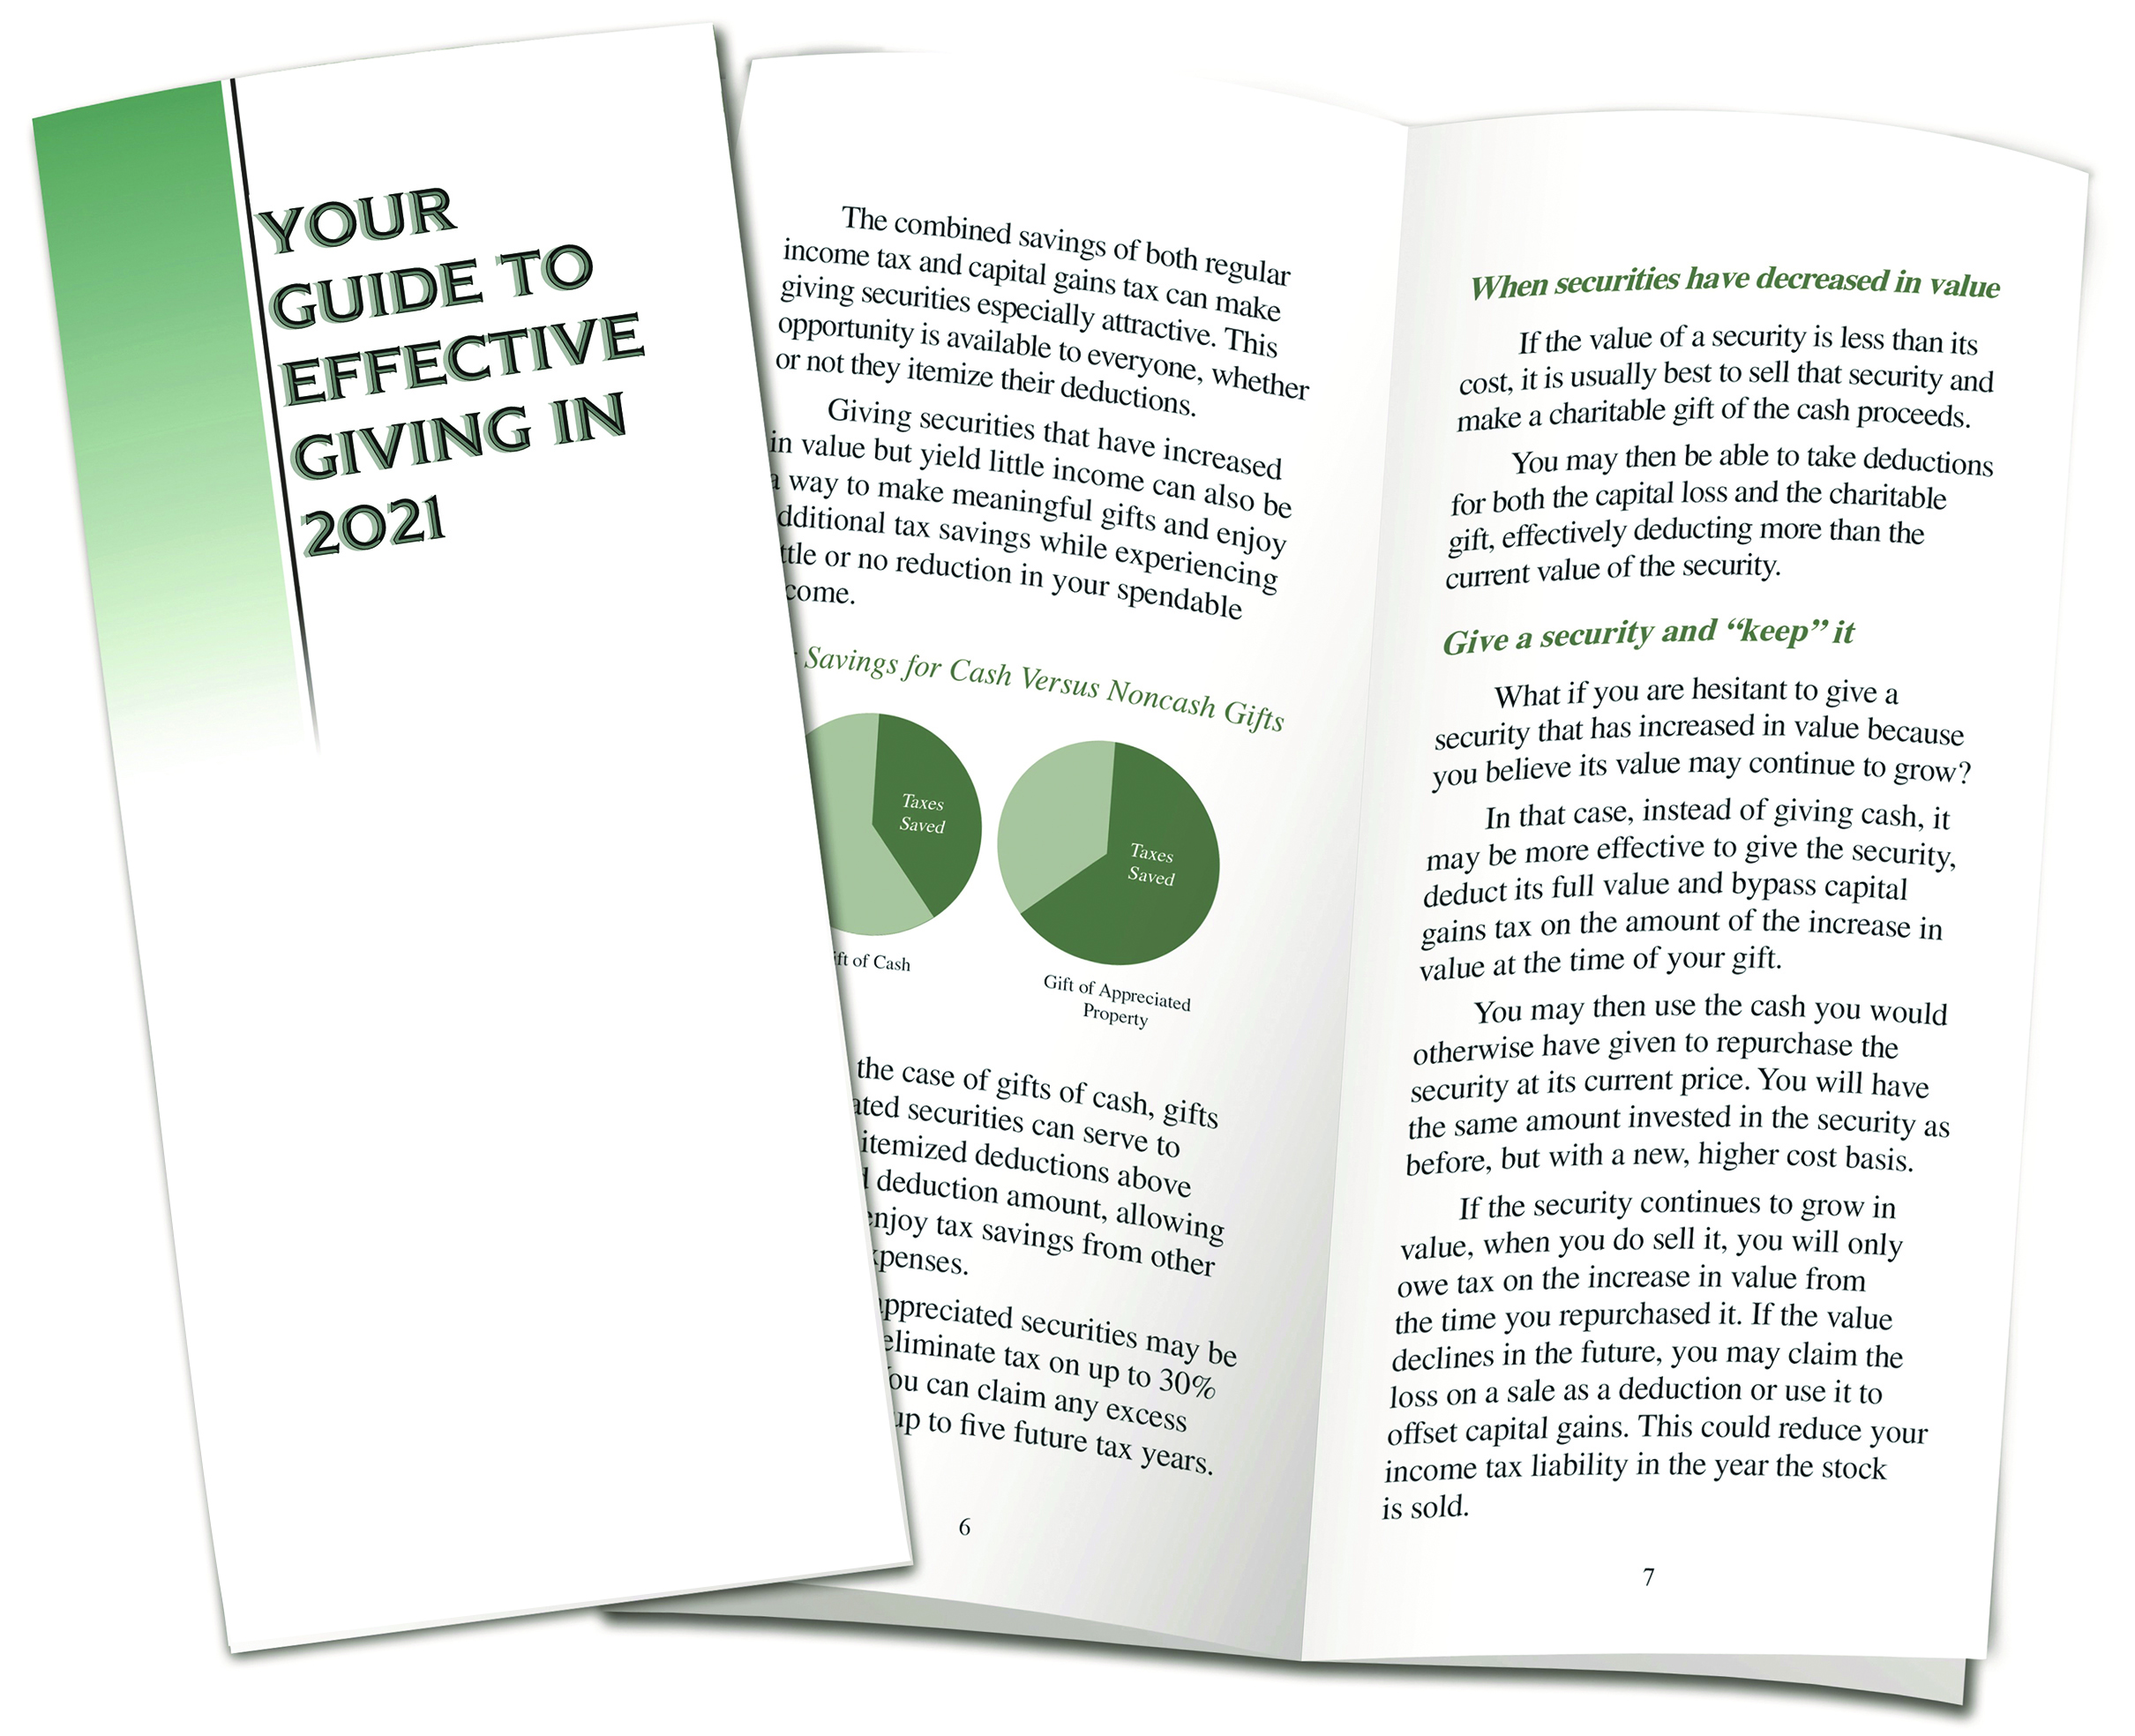 2021 guide to effective giving